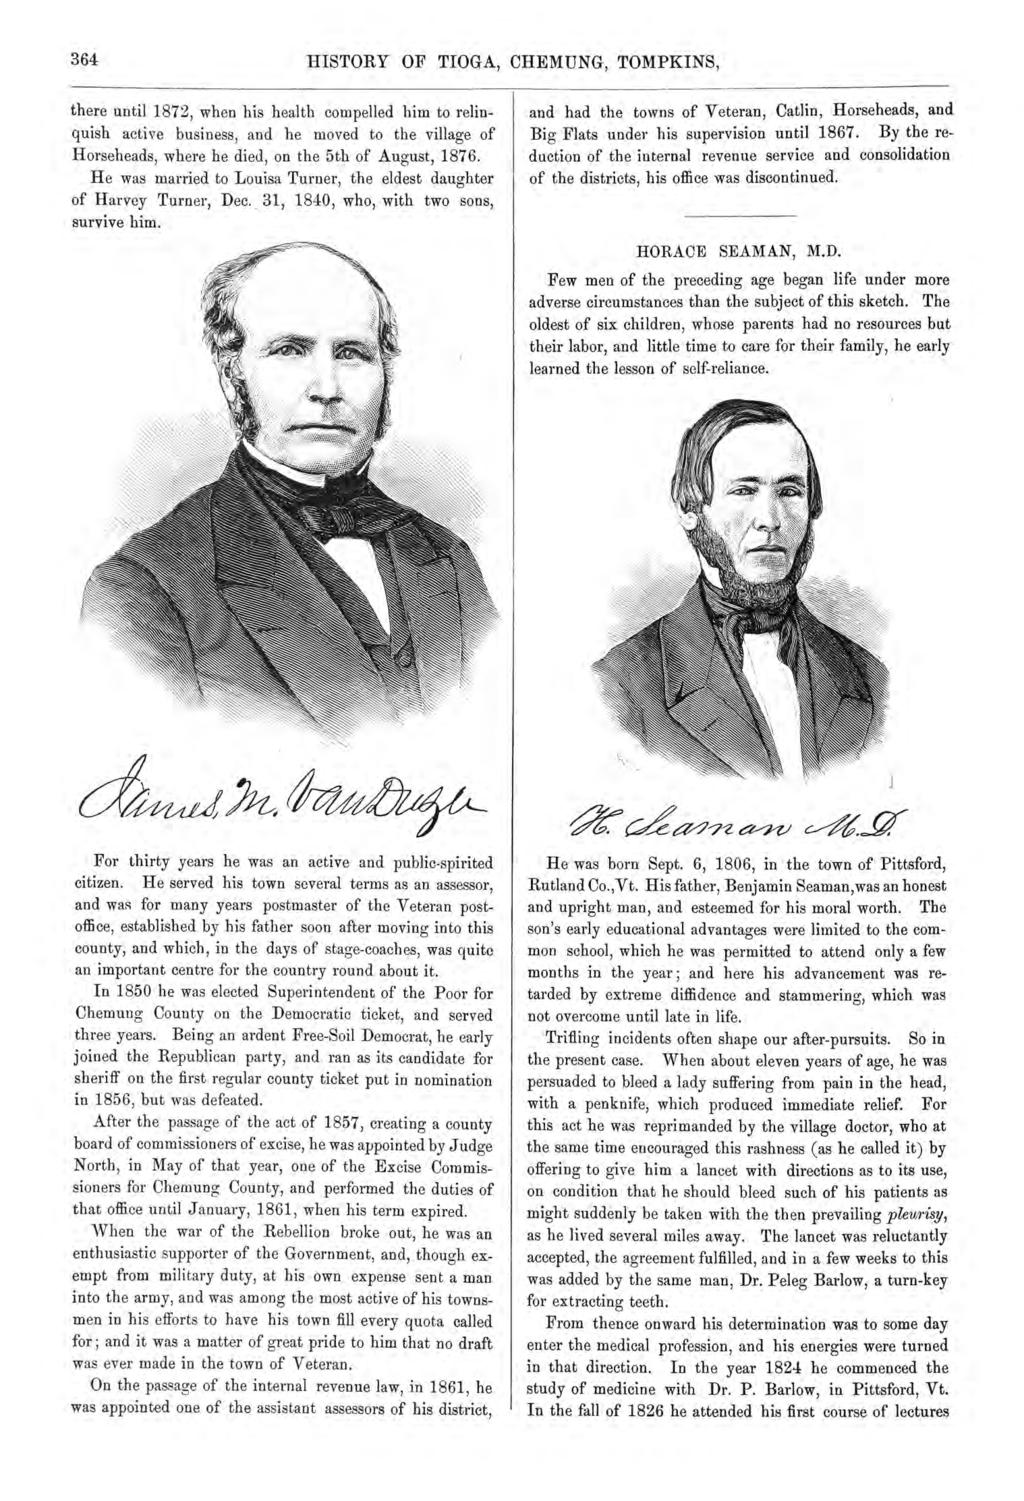 364 HISTORY OF TIOGA, CHEMUNG, TOMPKINS, there until 1872, when his health compelled him to relin quish active business, he moved to the village of Horseheads, where he died, on the 5th of August,